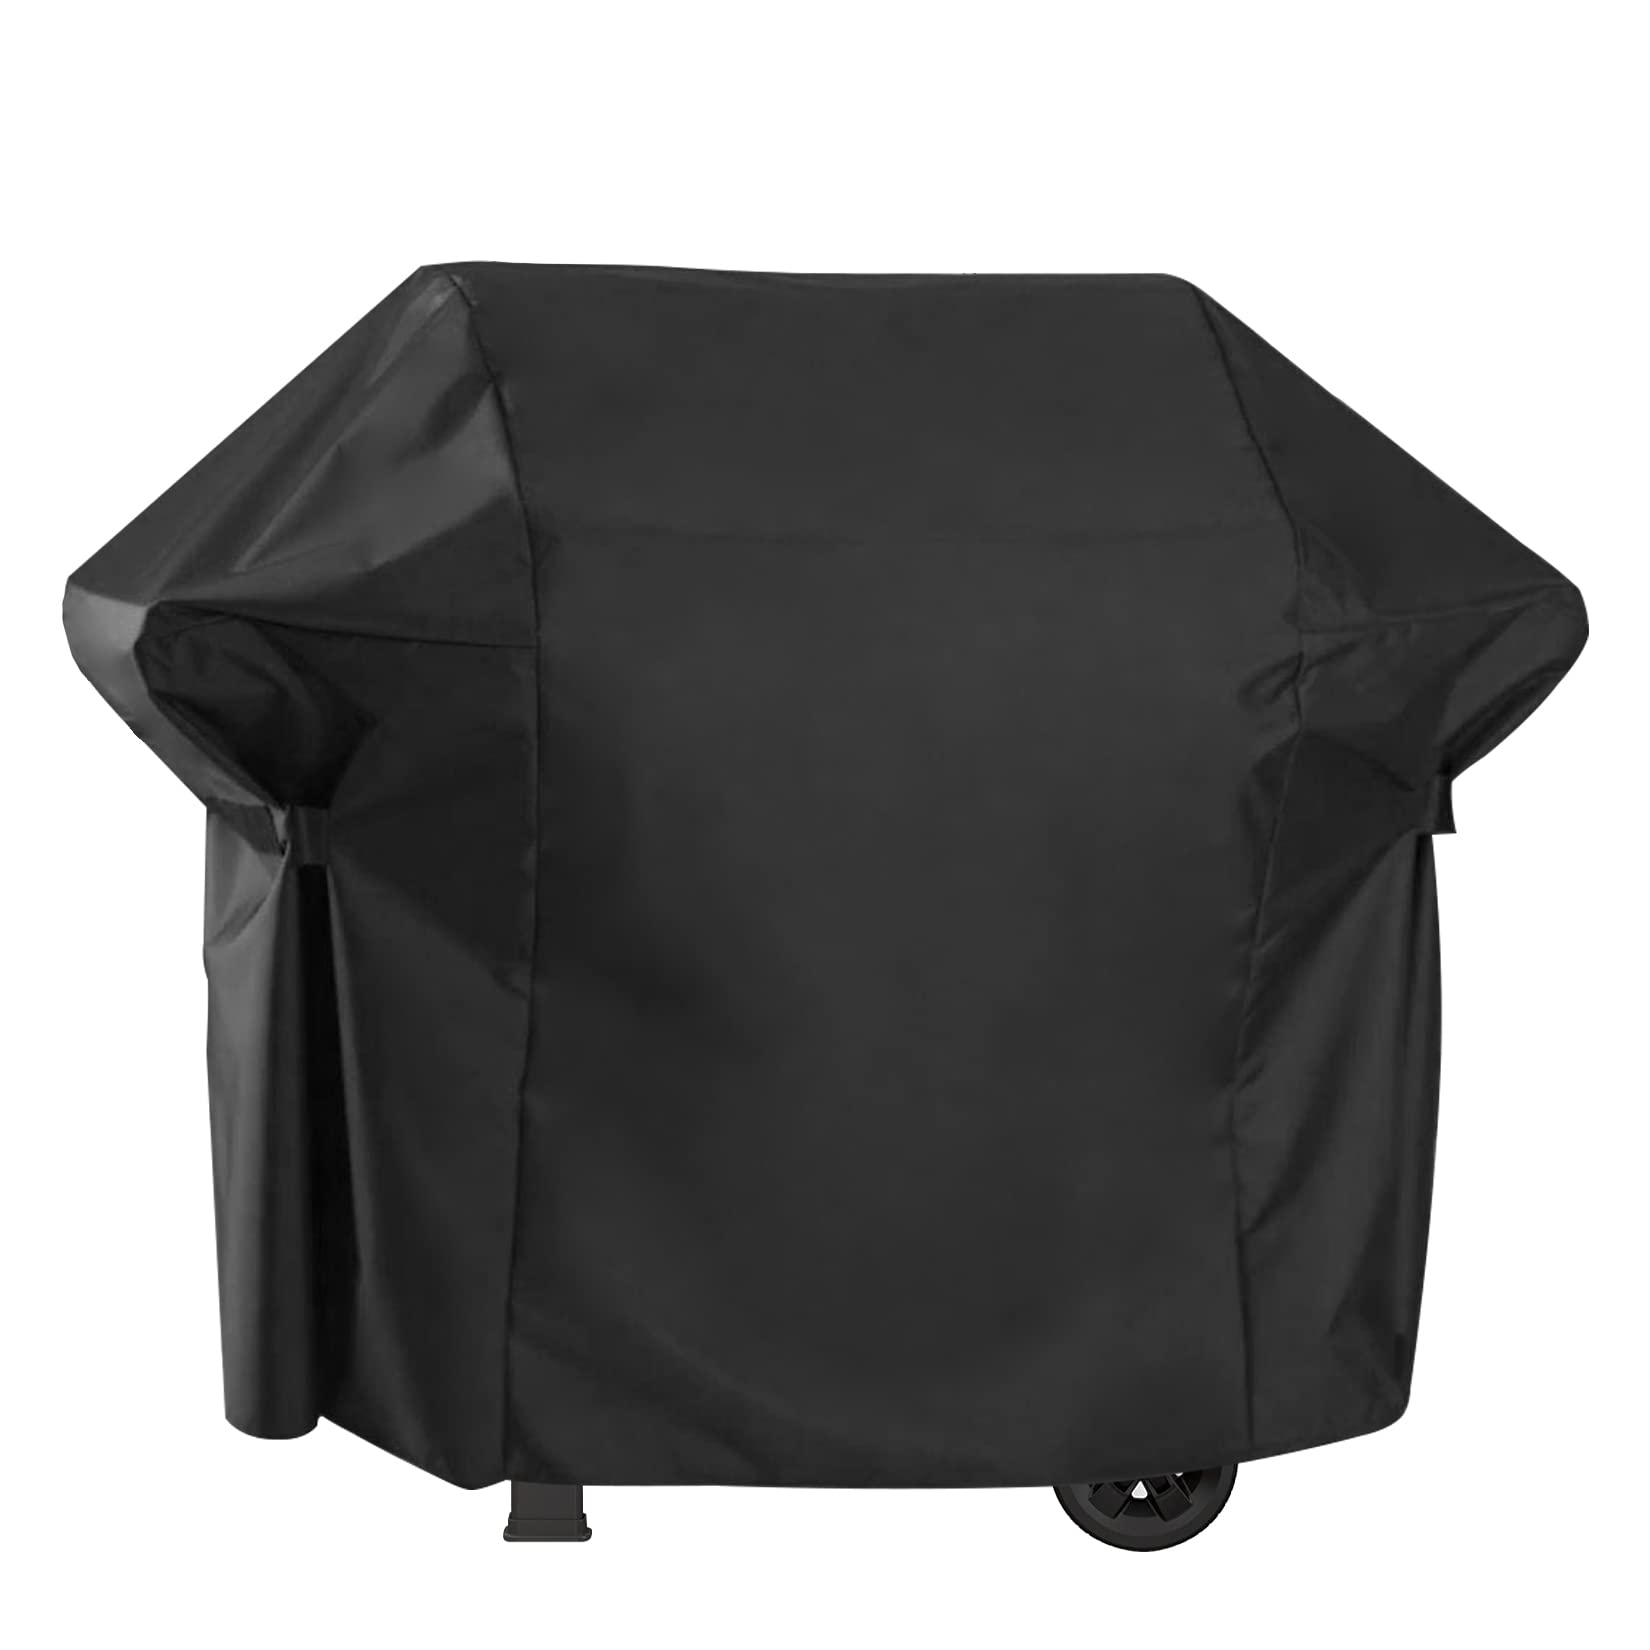 vchin 48 Inch Grill Cover, Fits for Weber Char-Broil Nexgrill Brinkmann and All Popular Brand Grills . Heavy Duty Waterproof Win